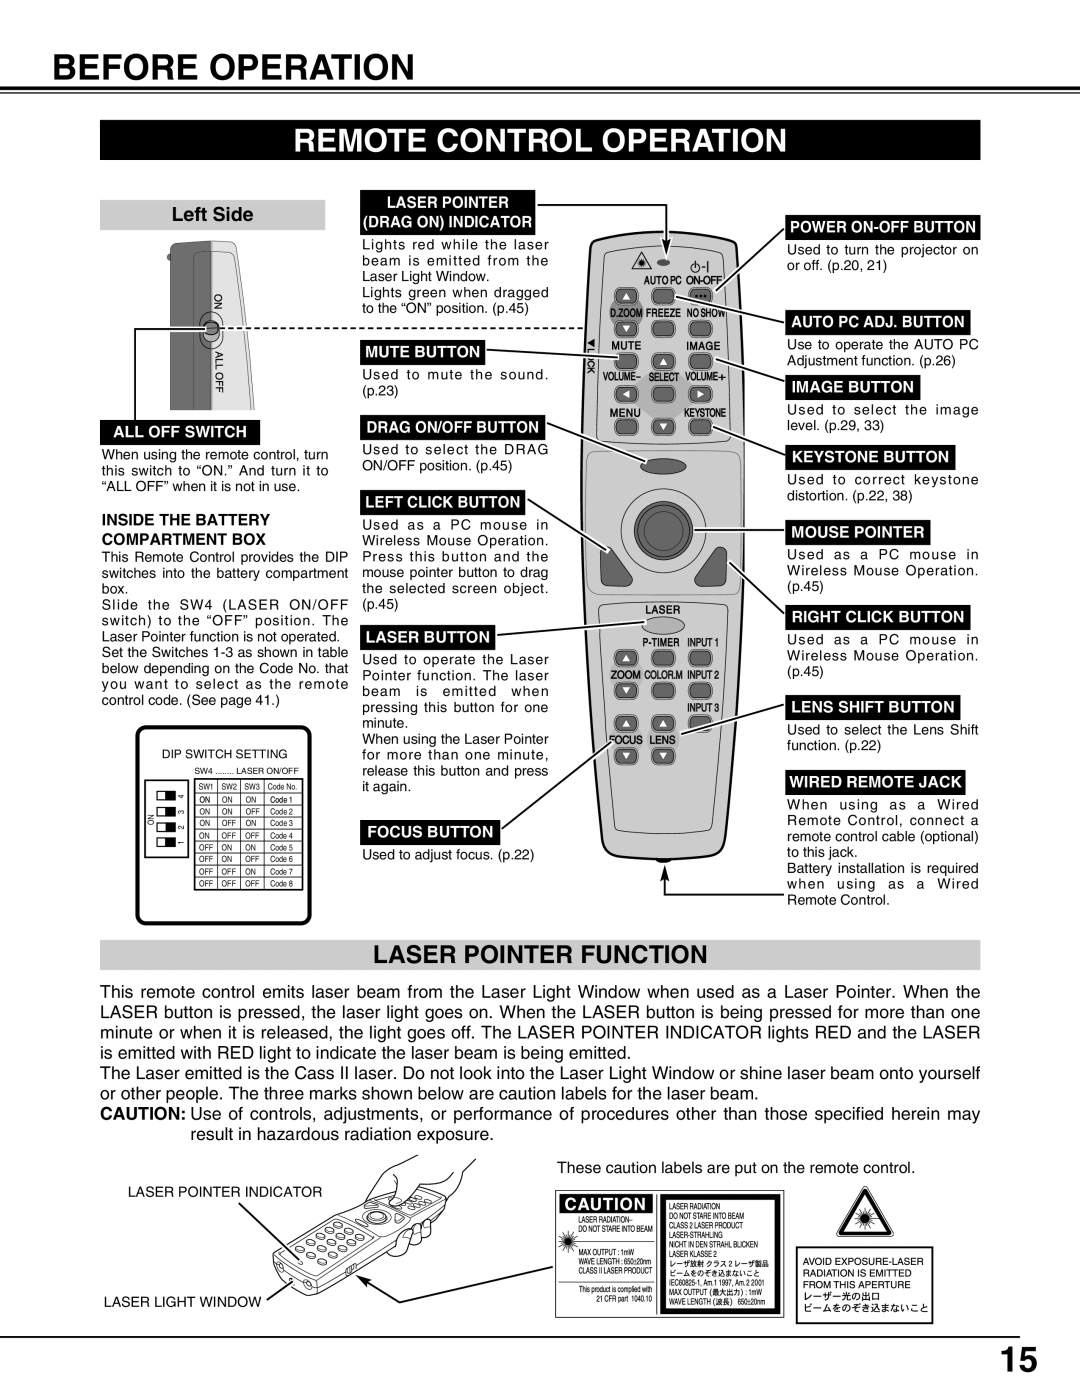 Eiki LC-X71L owner manual Before Operation, Remote Control Operation, Left Side 